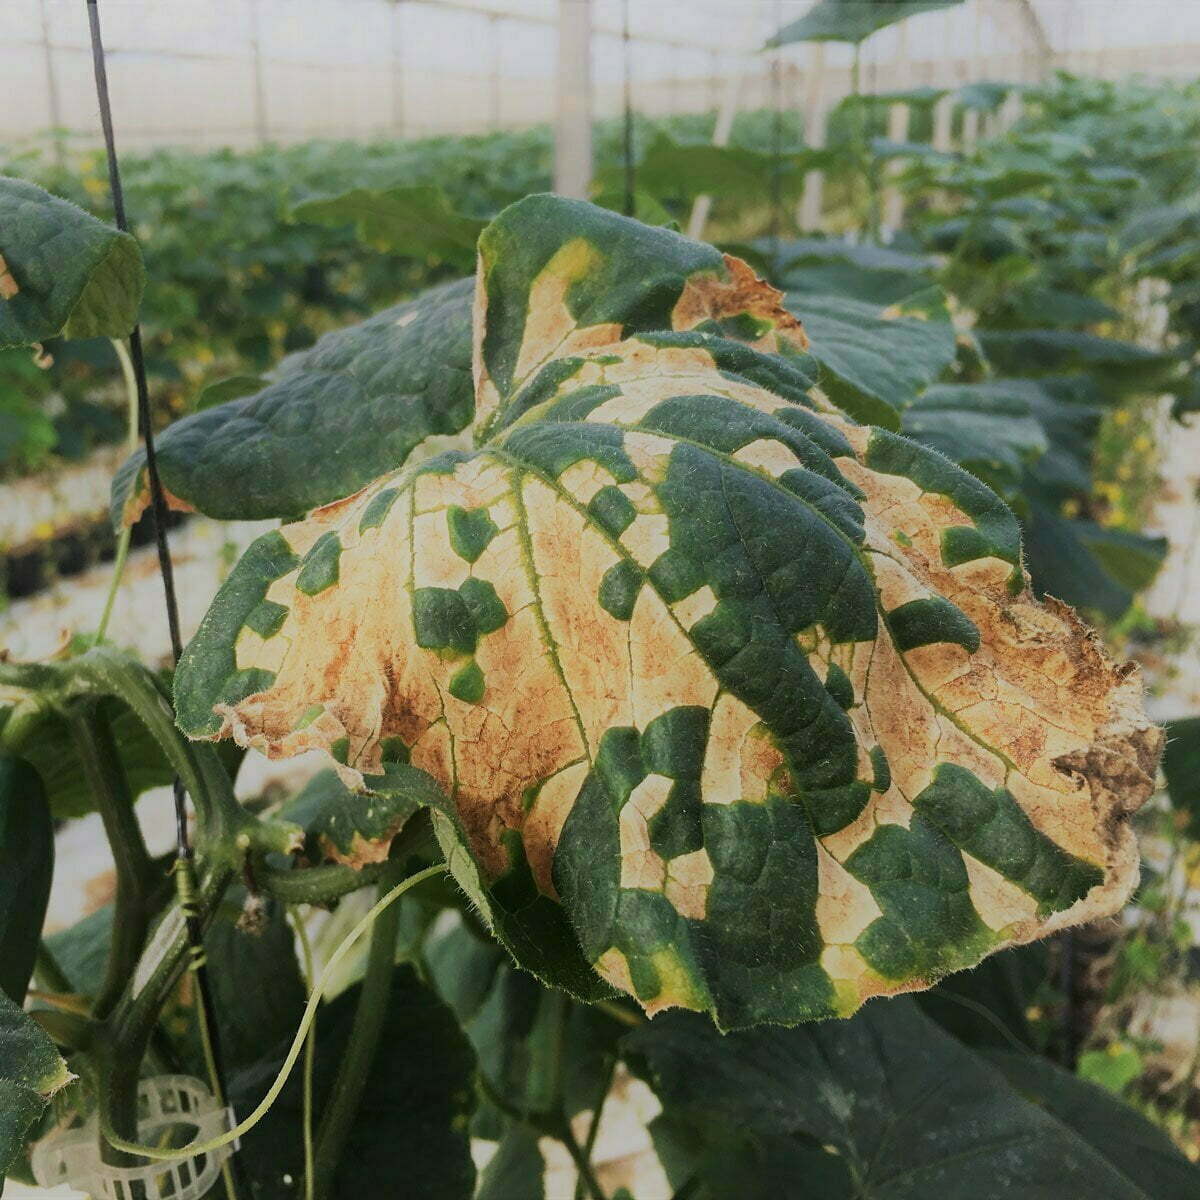 Yellow spots on upper side of cucumber leaf